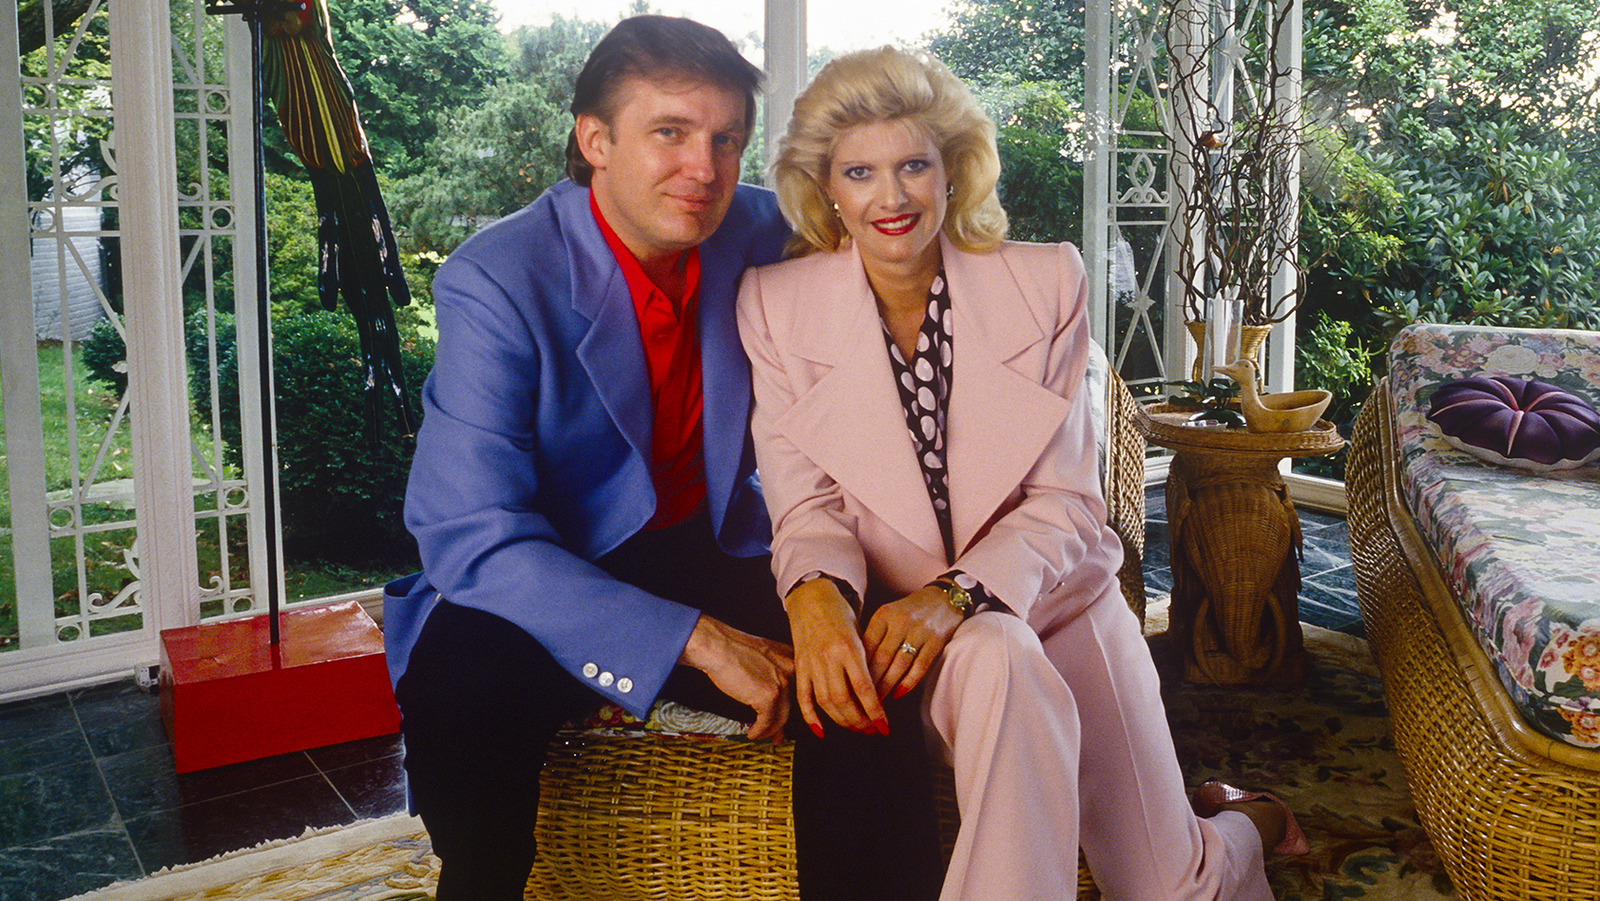 How Ivana Trump Discovered Donald's Affair With Marla Maples